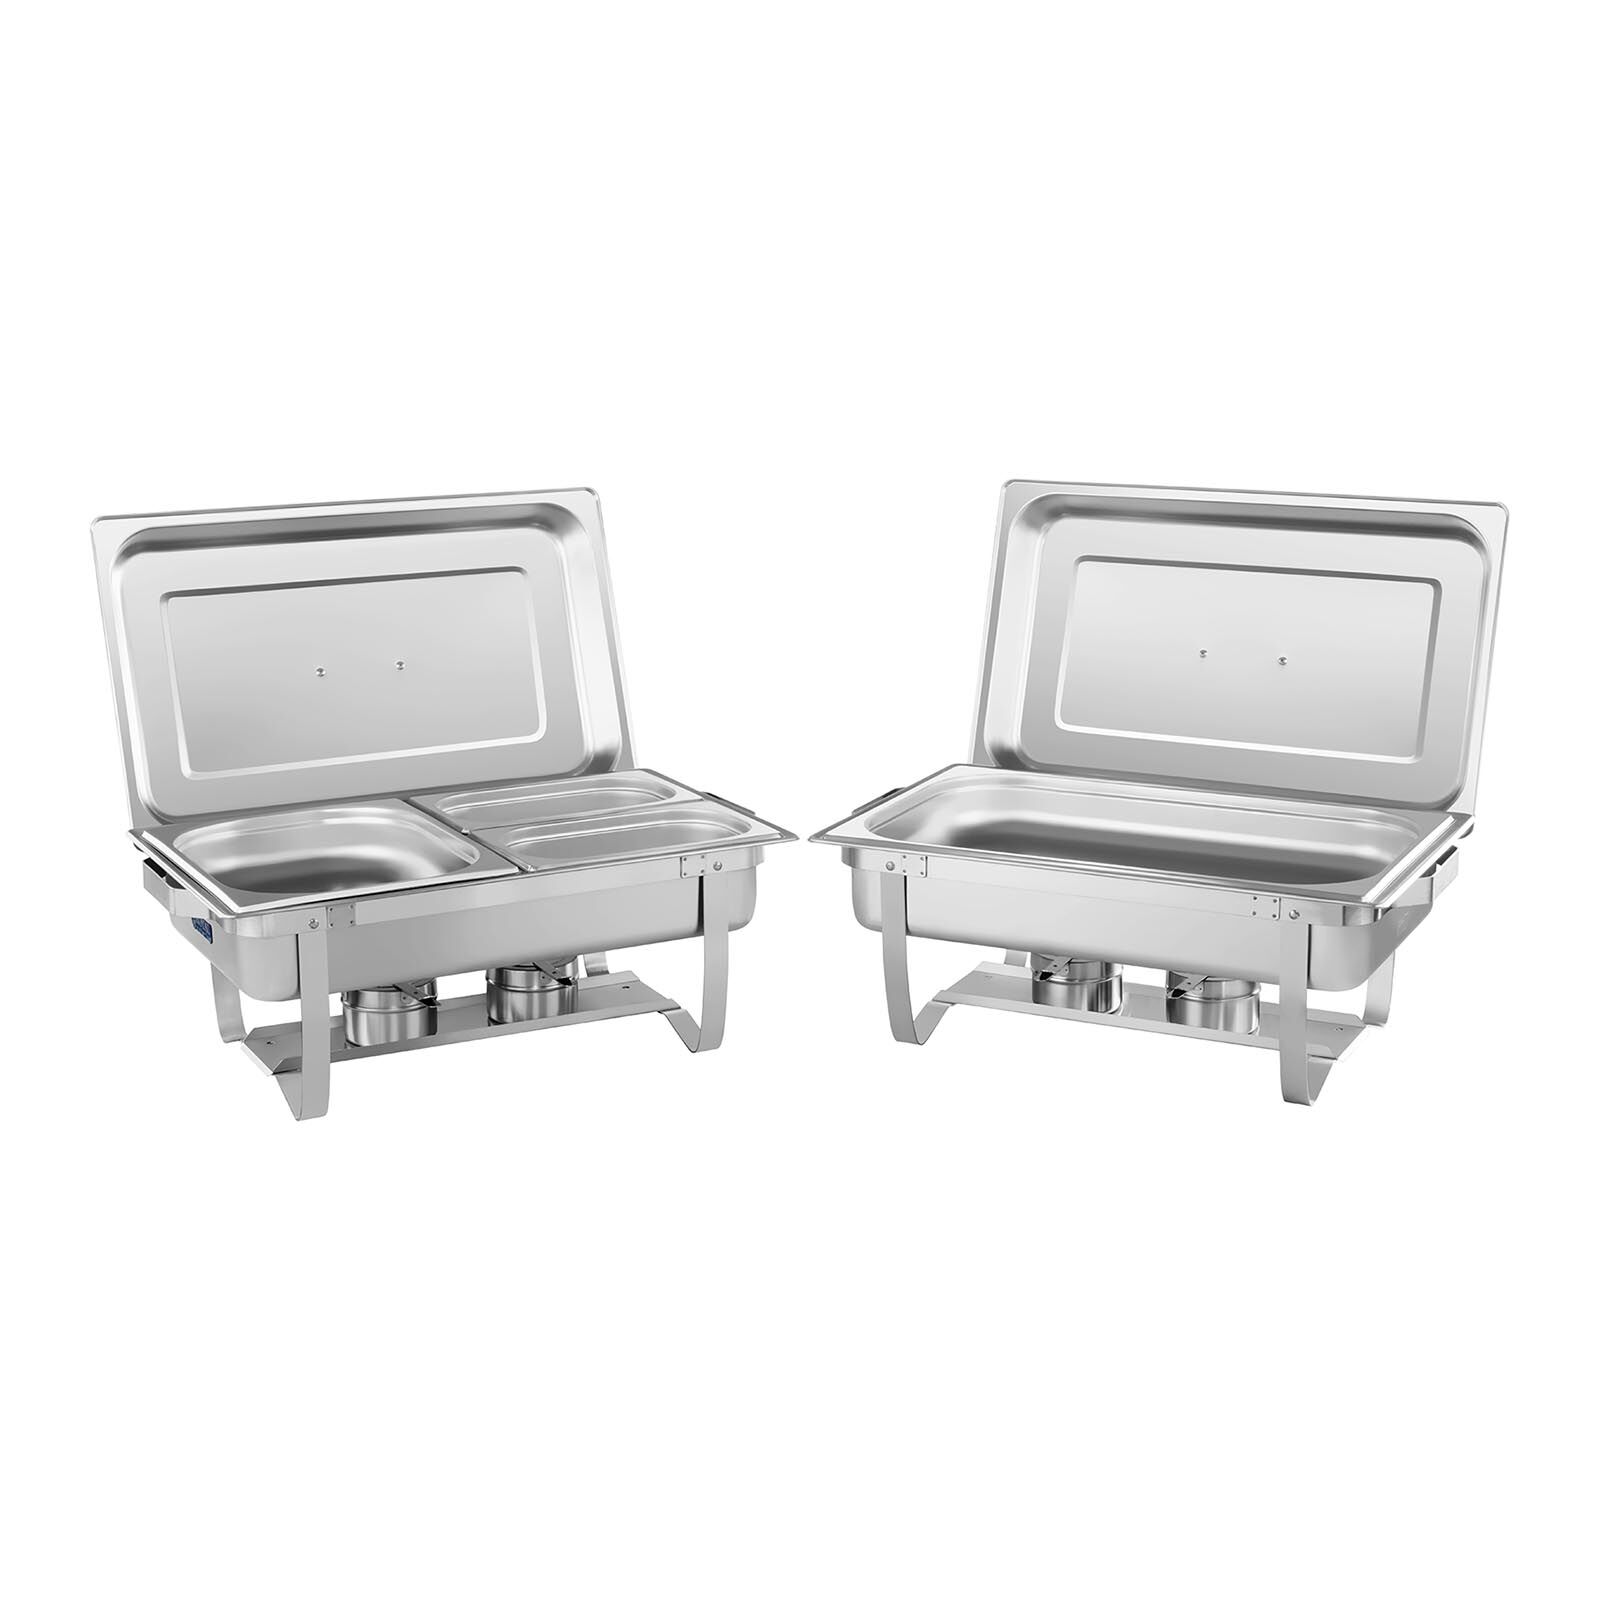 Royal Catering Chafing dish-set 2-delig - 53 cm - incl. GN-container 10010880